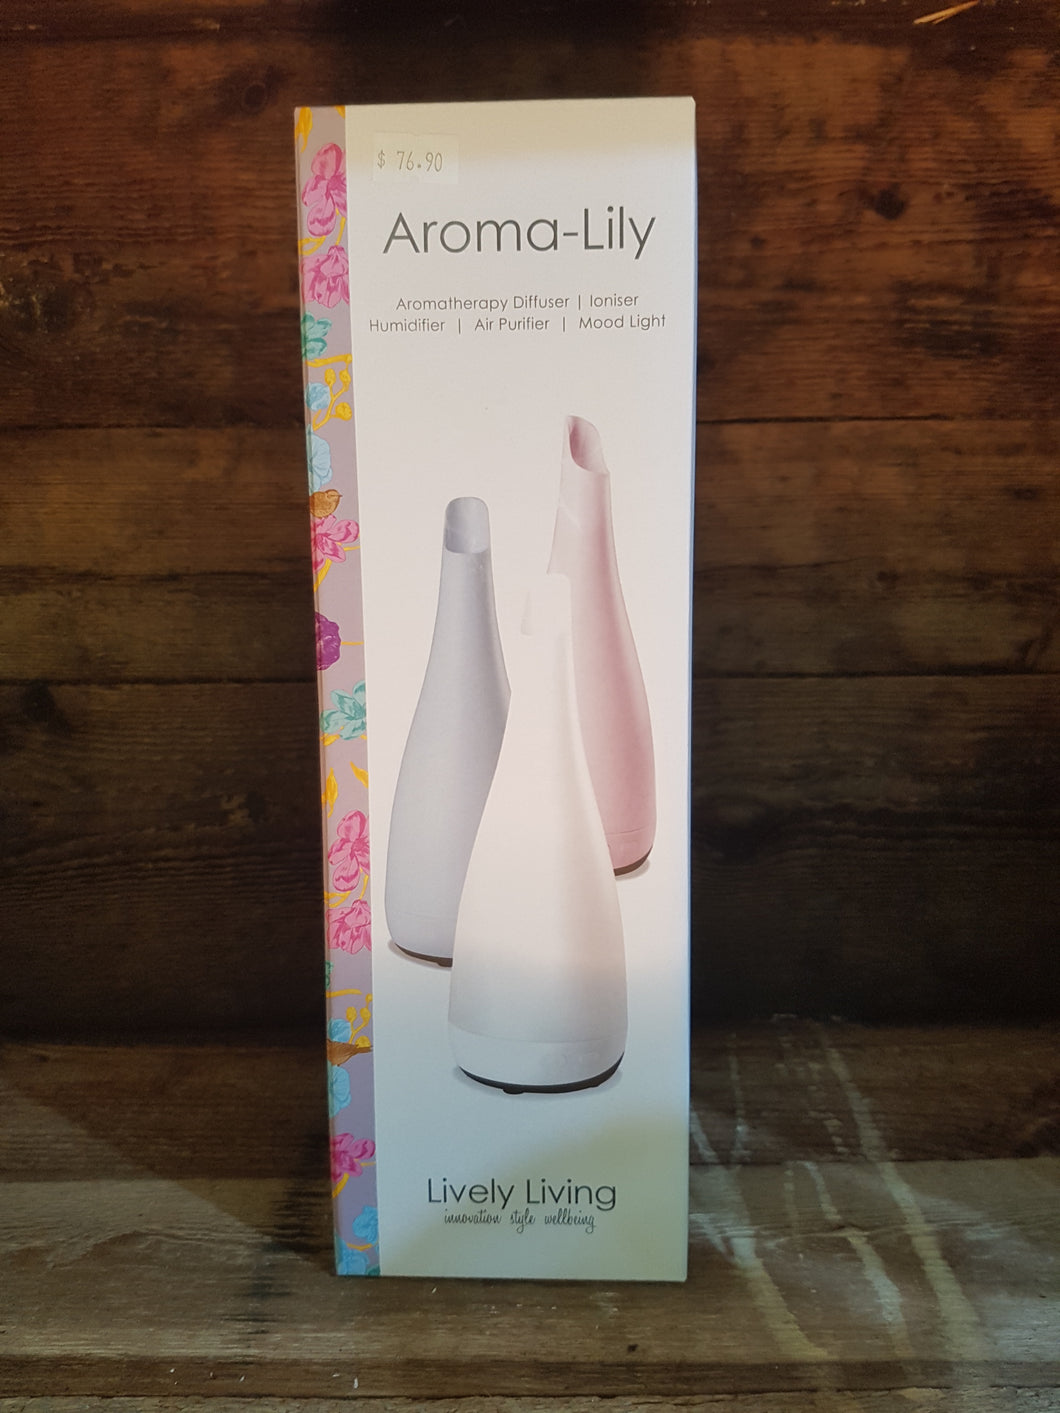 Aroma-Lily diffuser